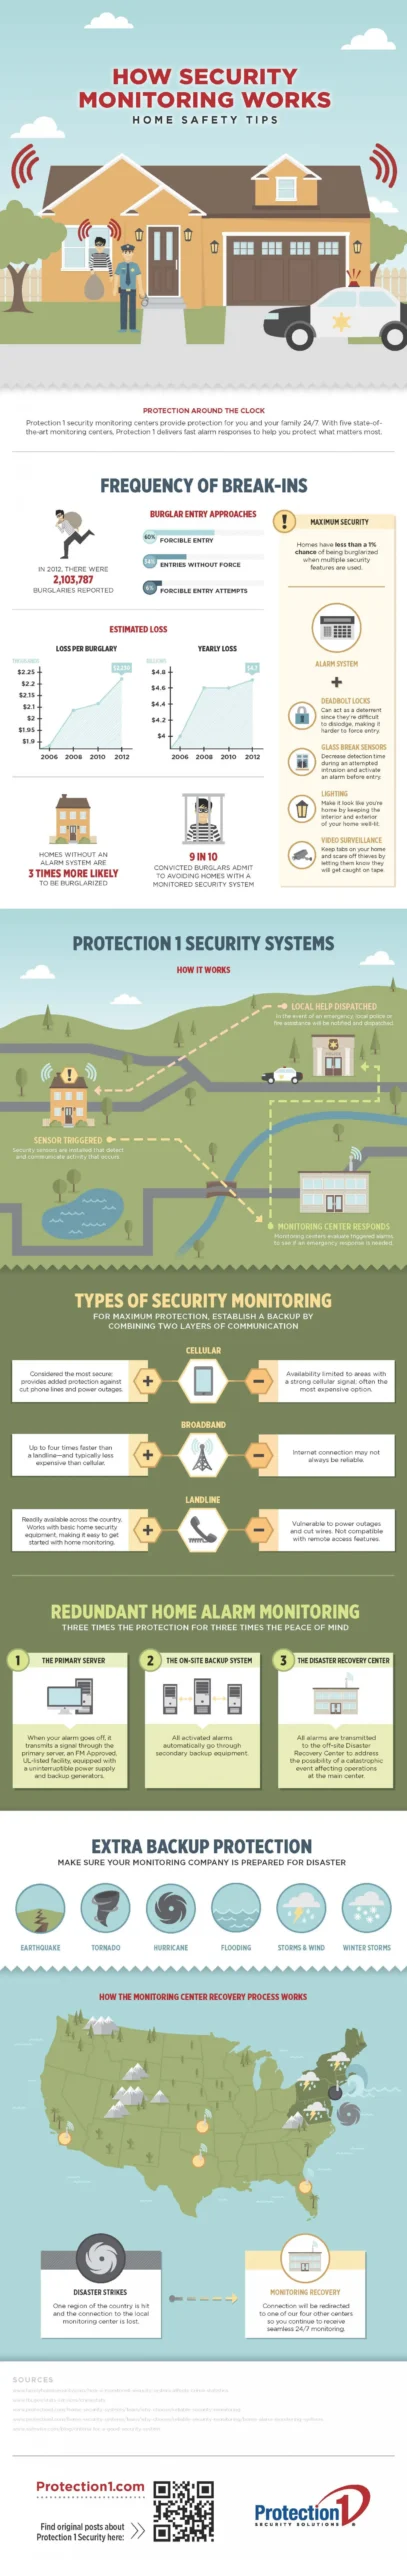 How Home Security Monitoring Works [InfoGraphic]
